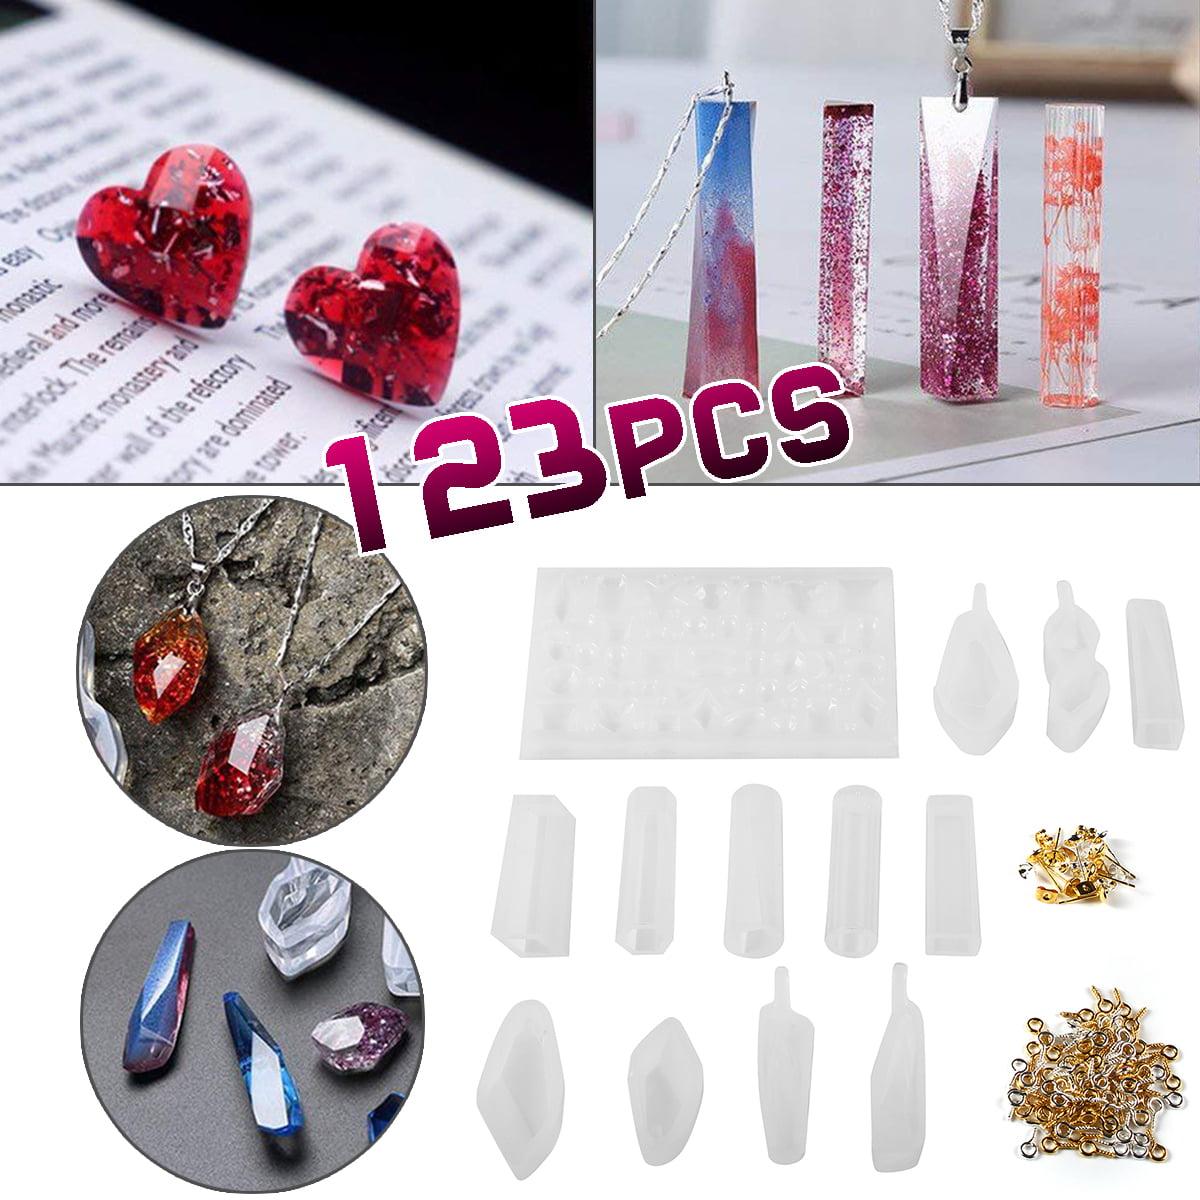 DDARK 1 Set Epoxy Resin Kit Handmade Professional DIY Jewelry Making Disposable Gloves Pins Necklace Pendant Ear Stud Silicone Molds Dropper Measure Cup 